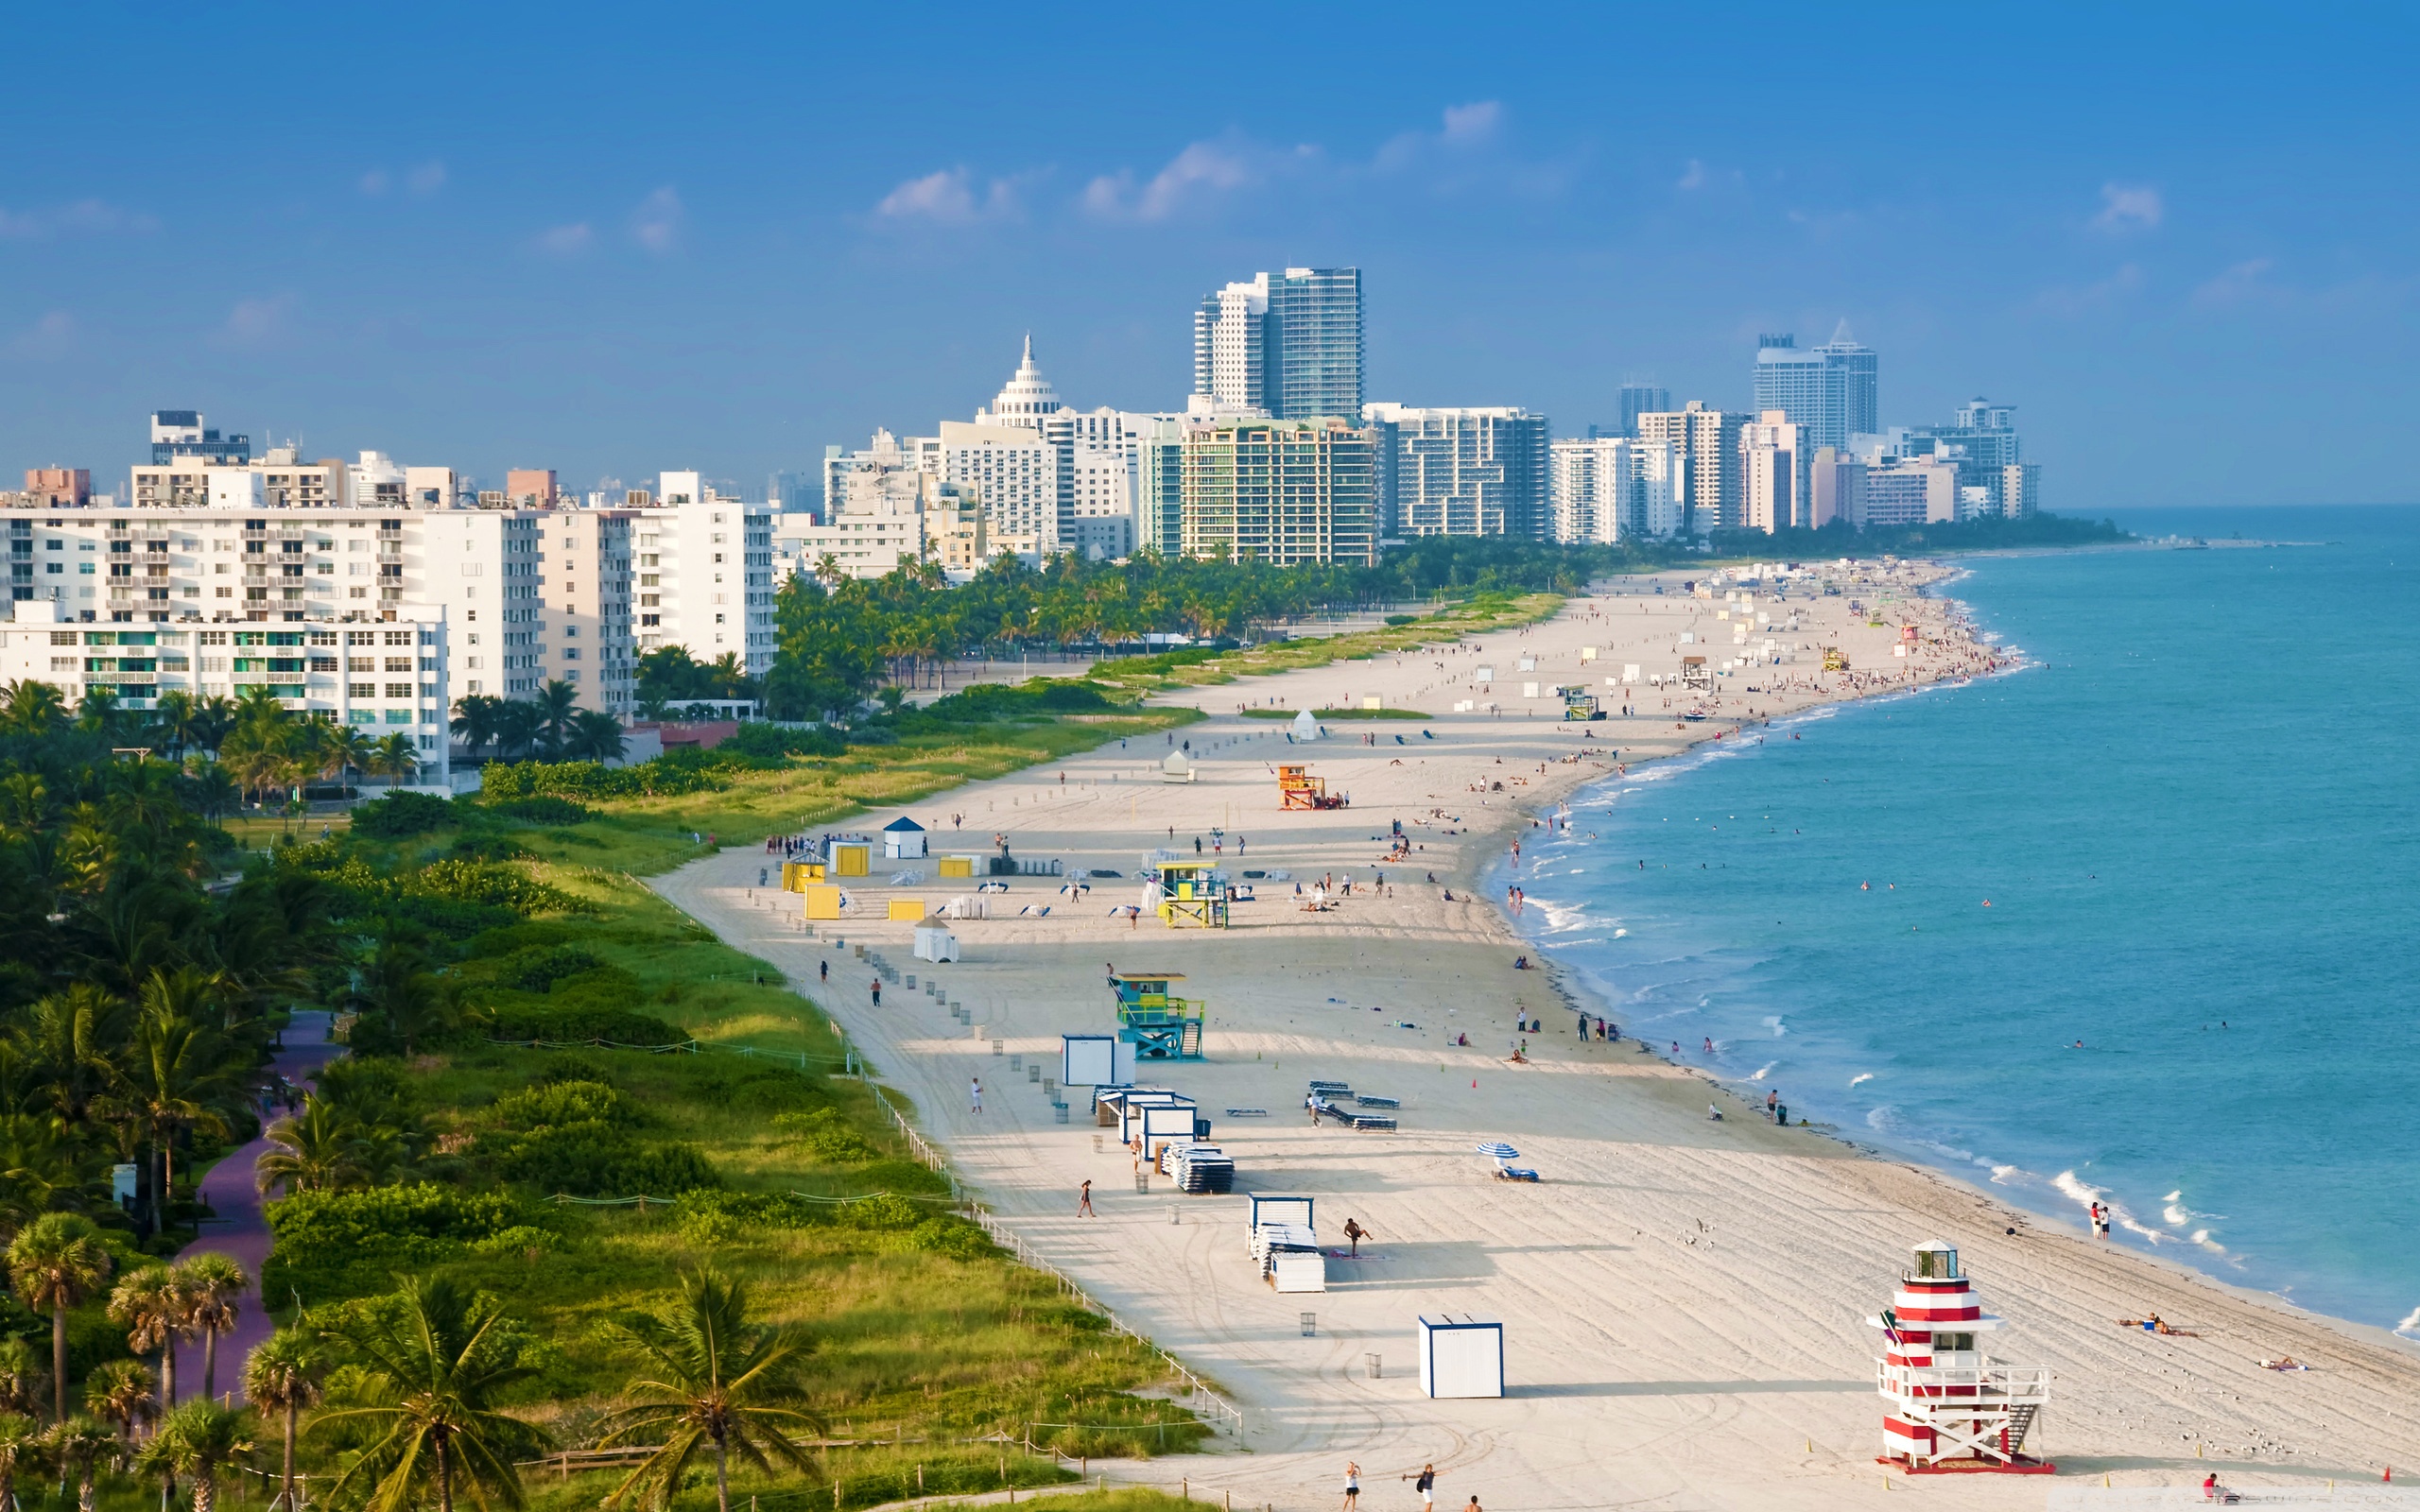 Miami Beach Invites Visitors to Turn Vacations into Remote “Workcations” in 2021